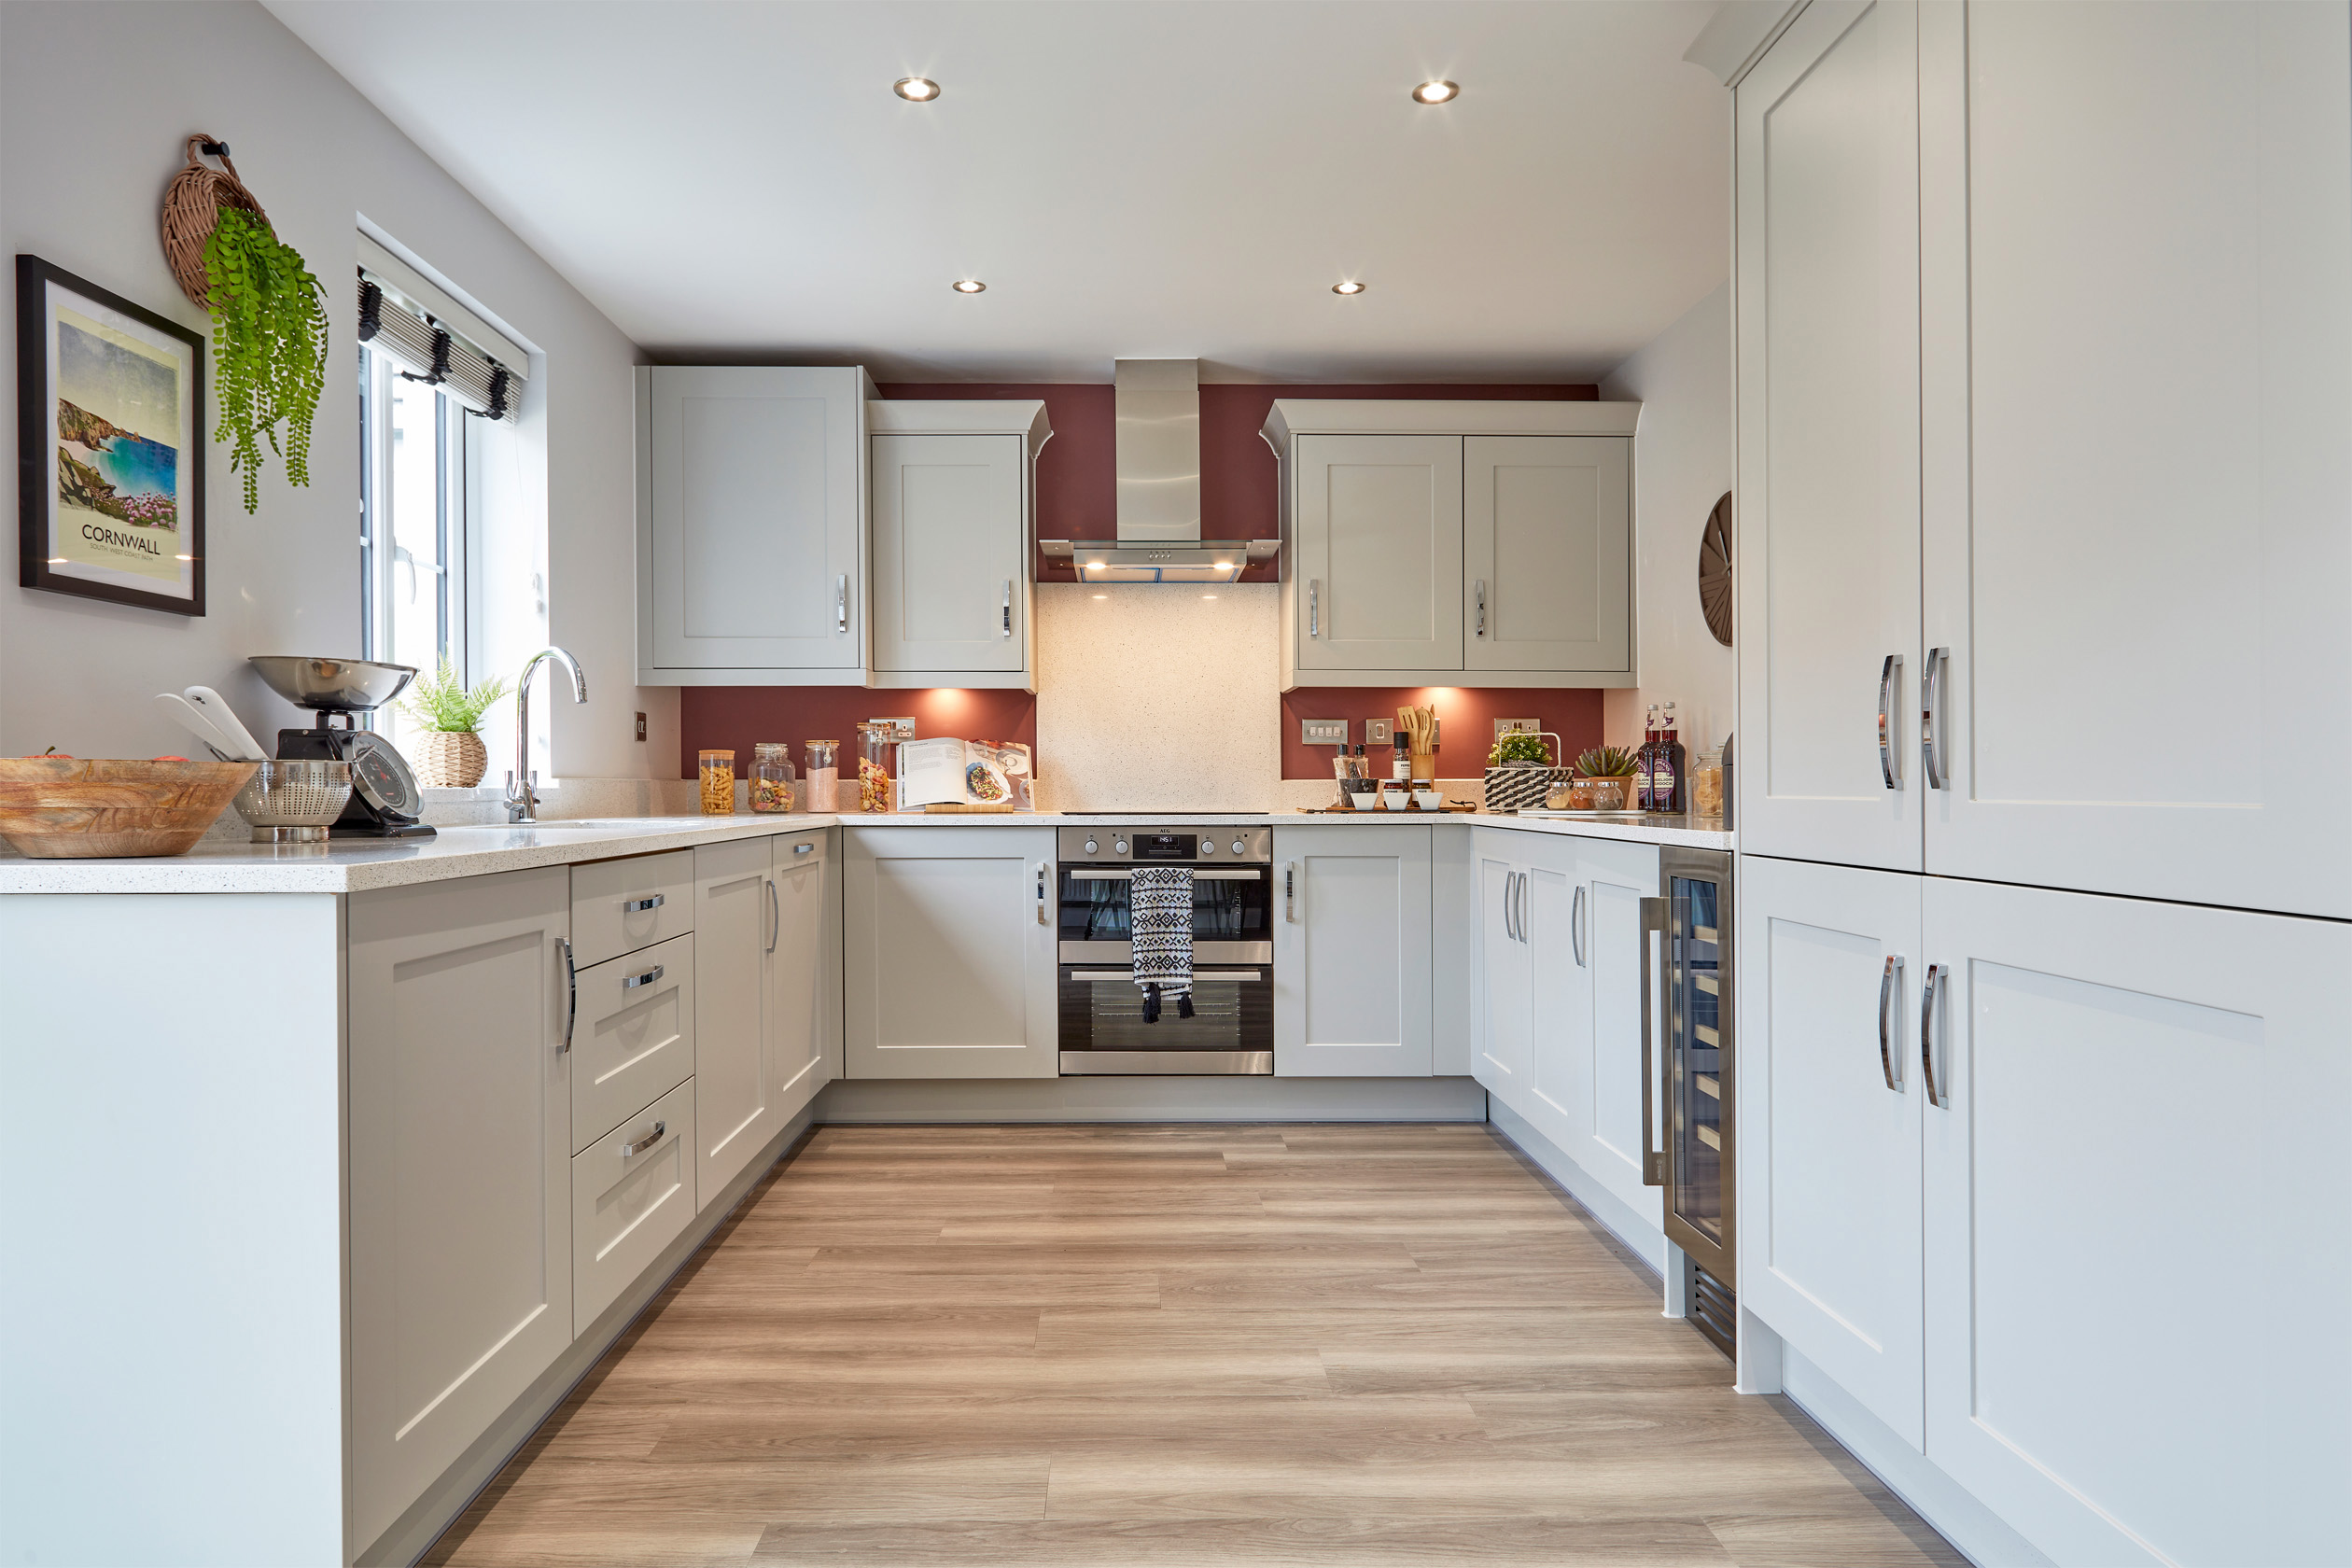 Property 2 of 10. Open Plan Kitchen In The Kingsley 4 Bedroom Home